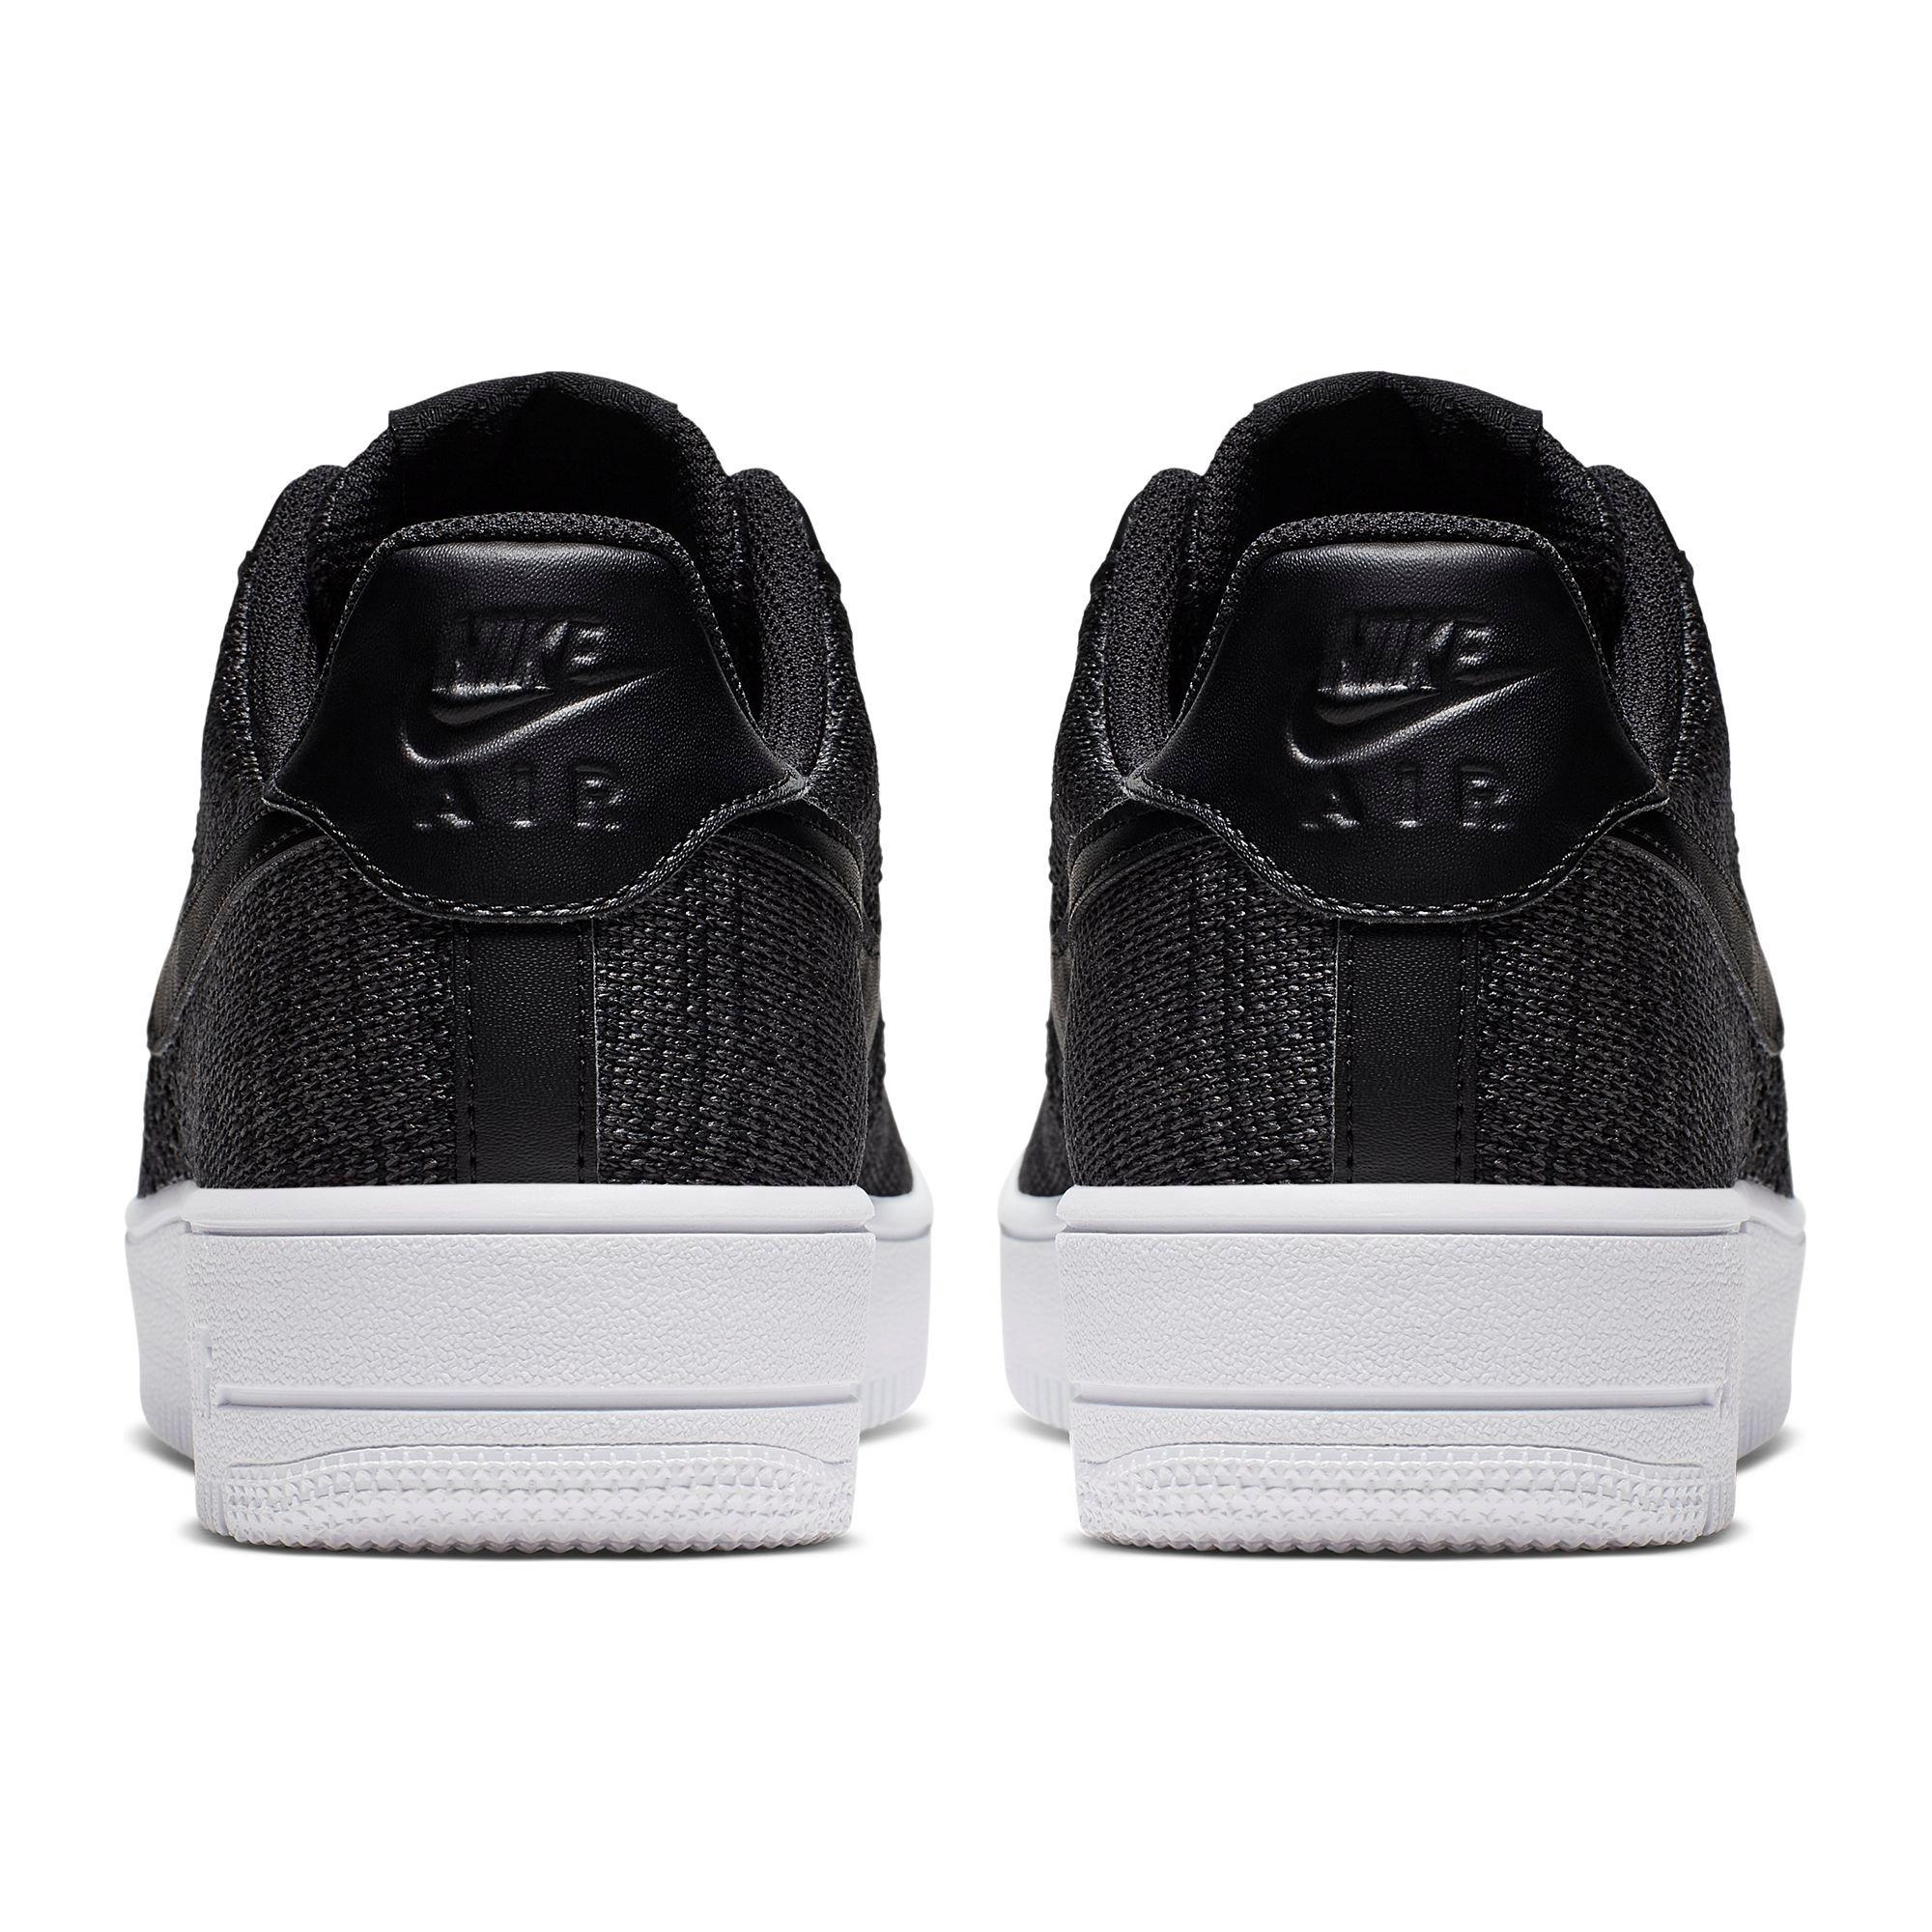 Masacre salud importar Nike Air Force 1 Low Flyknit 2.0 "Black/Anthracite/White" Men's Shoe